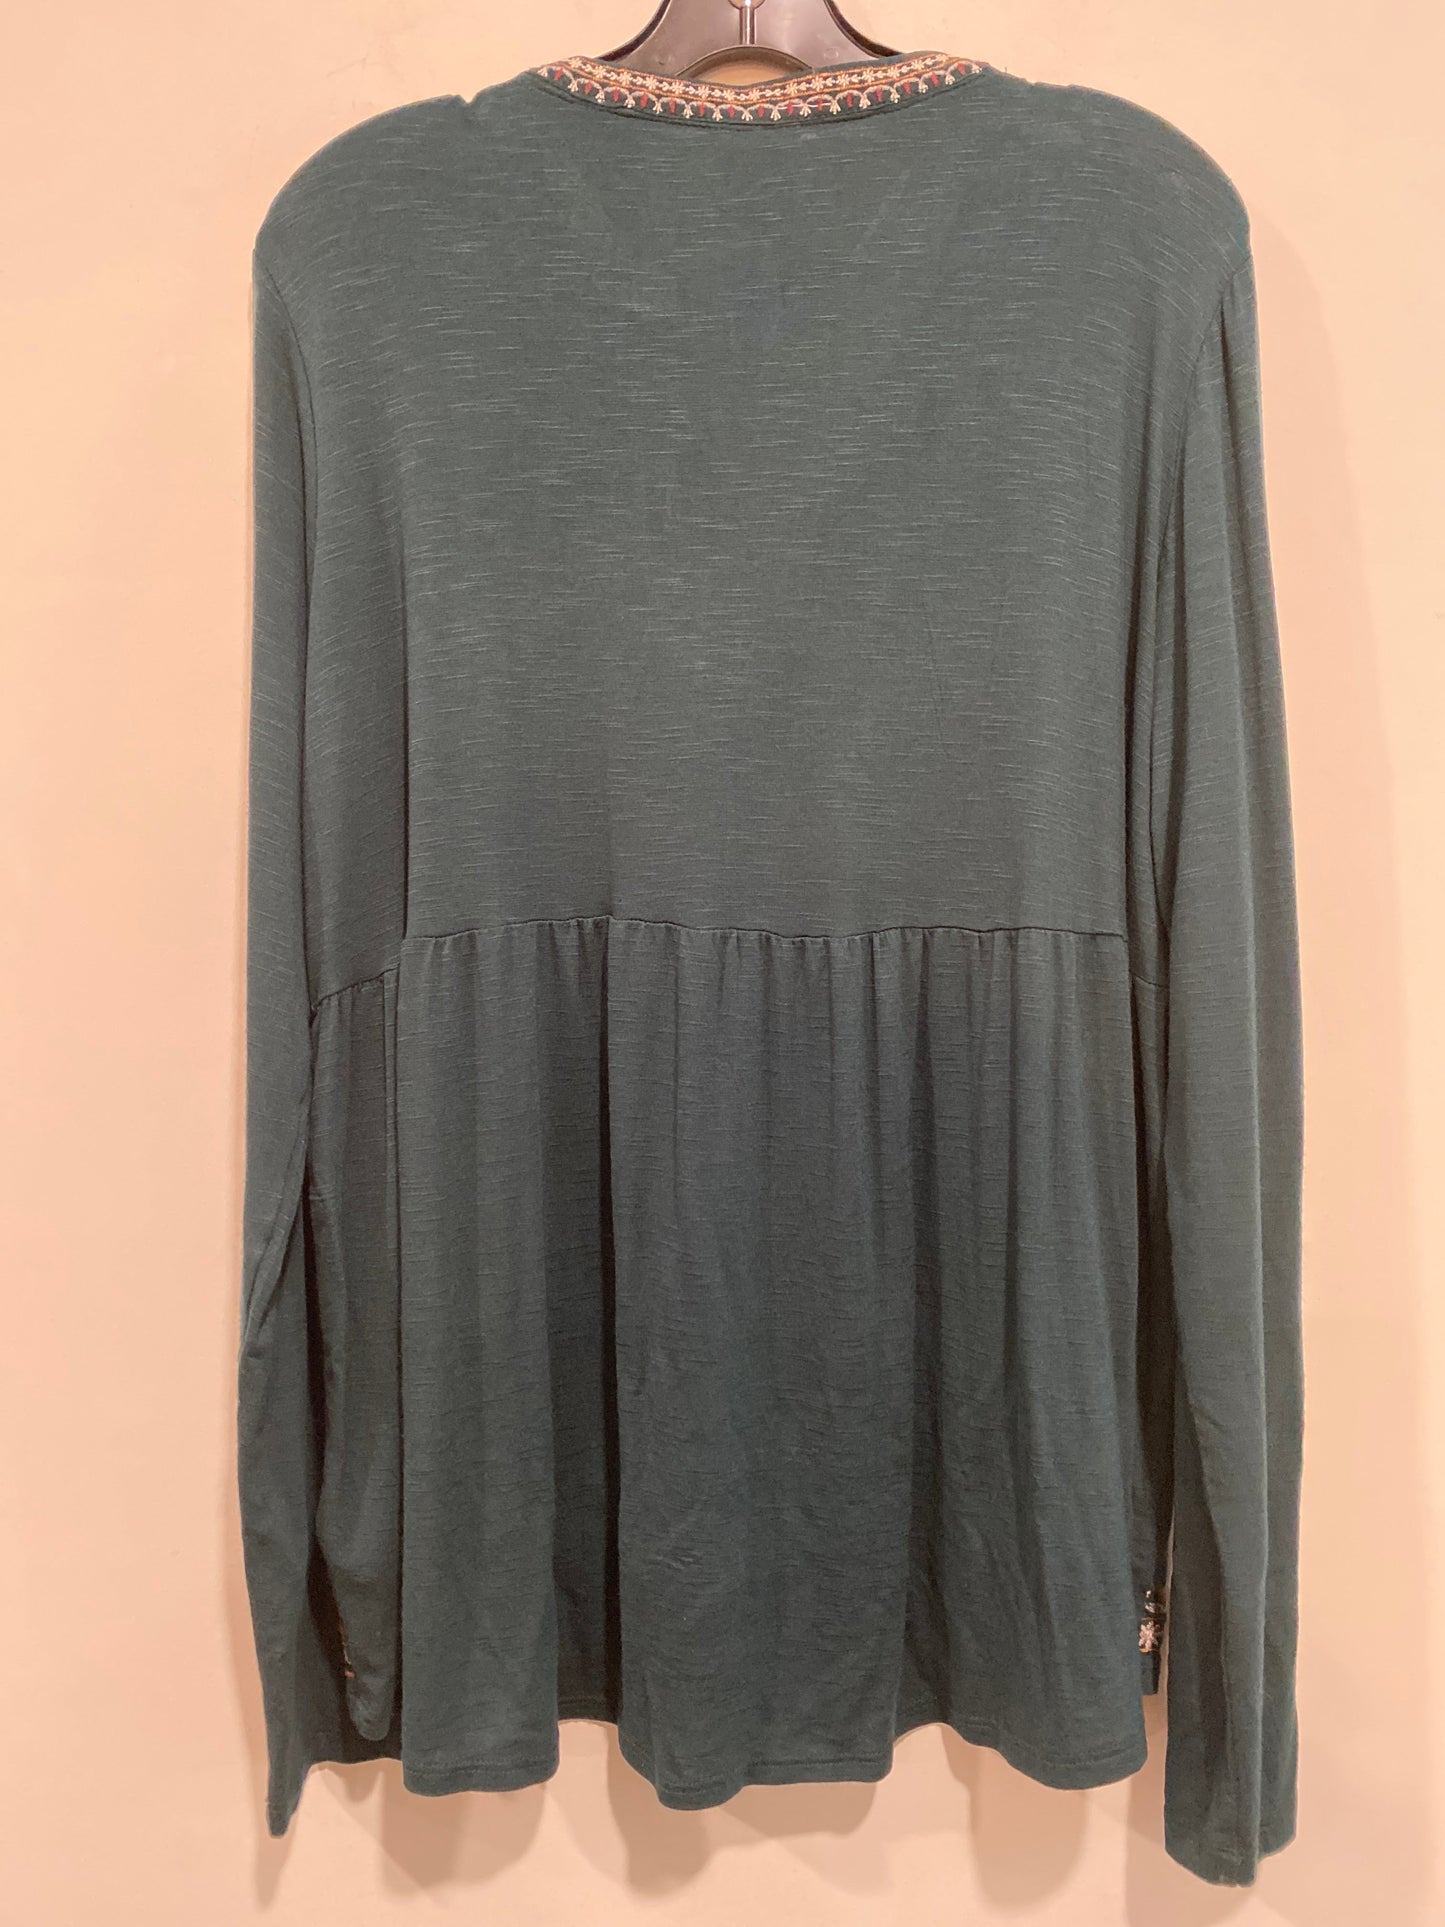 Green Top Long Sleeve Knox Rose, Size Xl